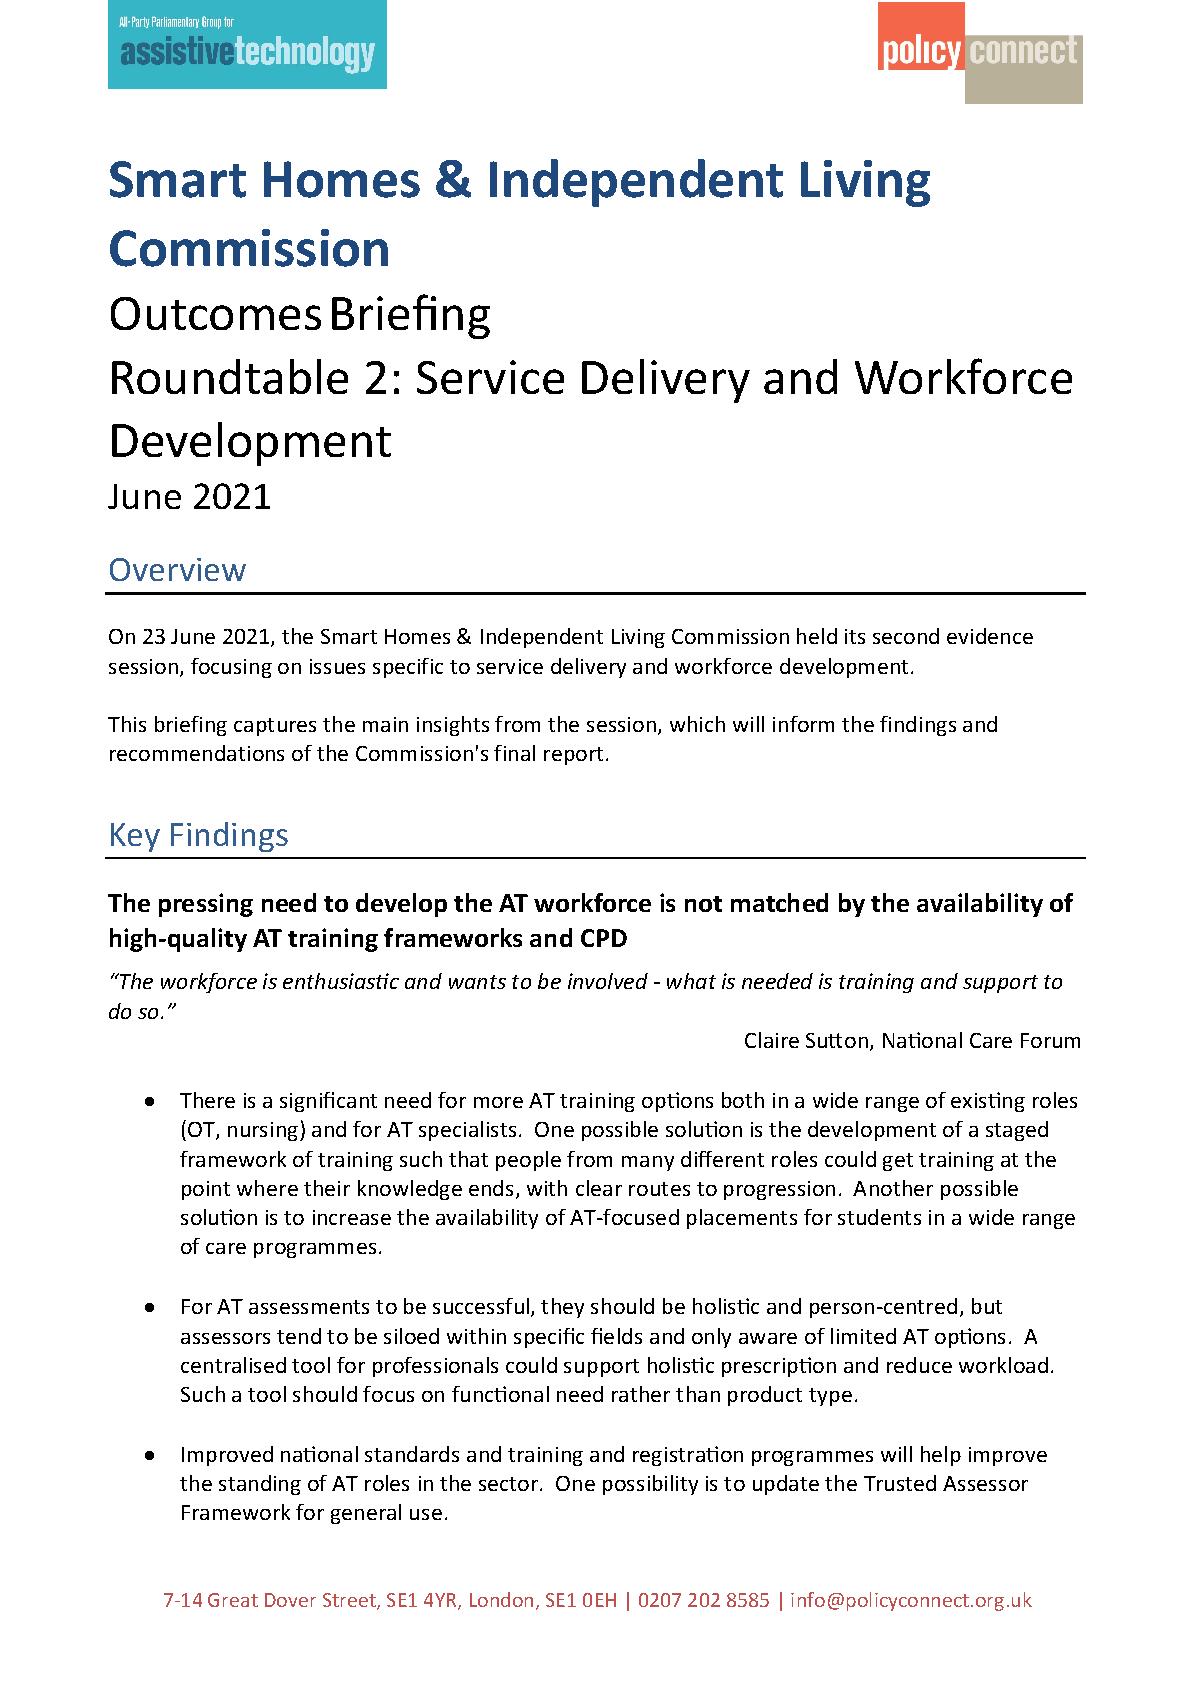 Outcomes Briefing Roundtable 2 - Service Delivery and Workforce Development